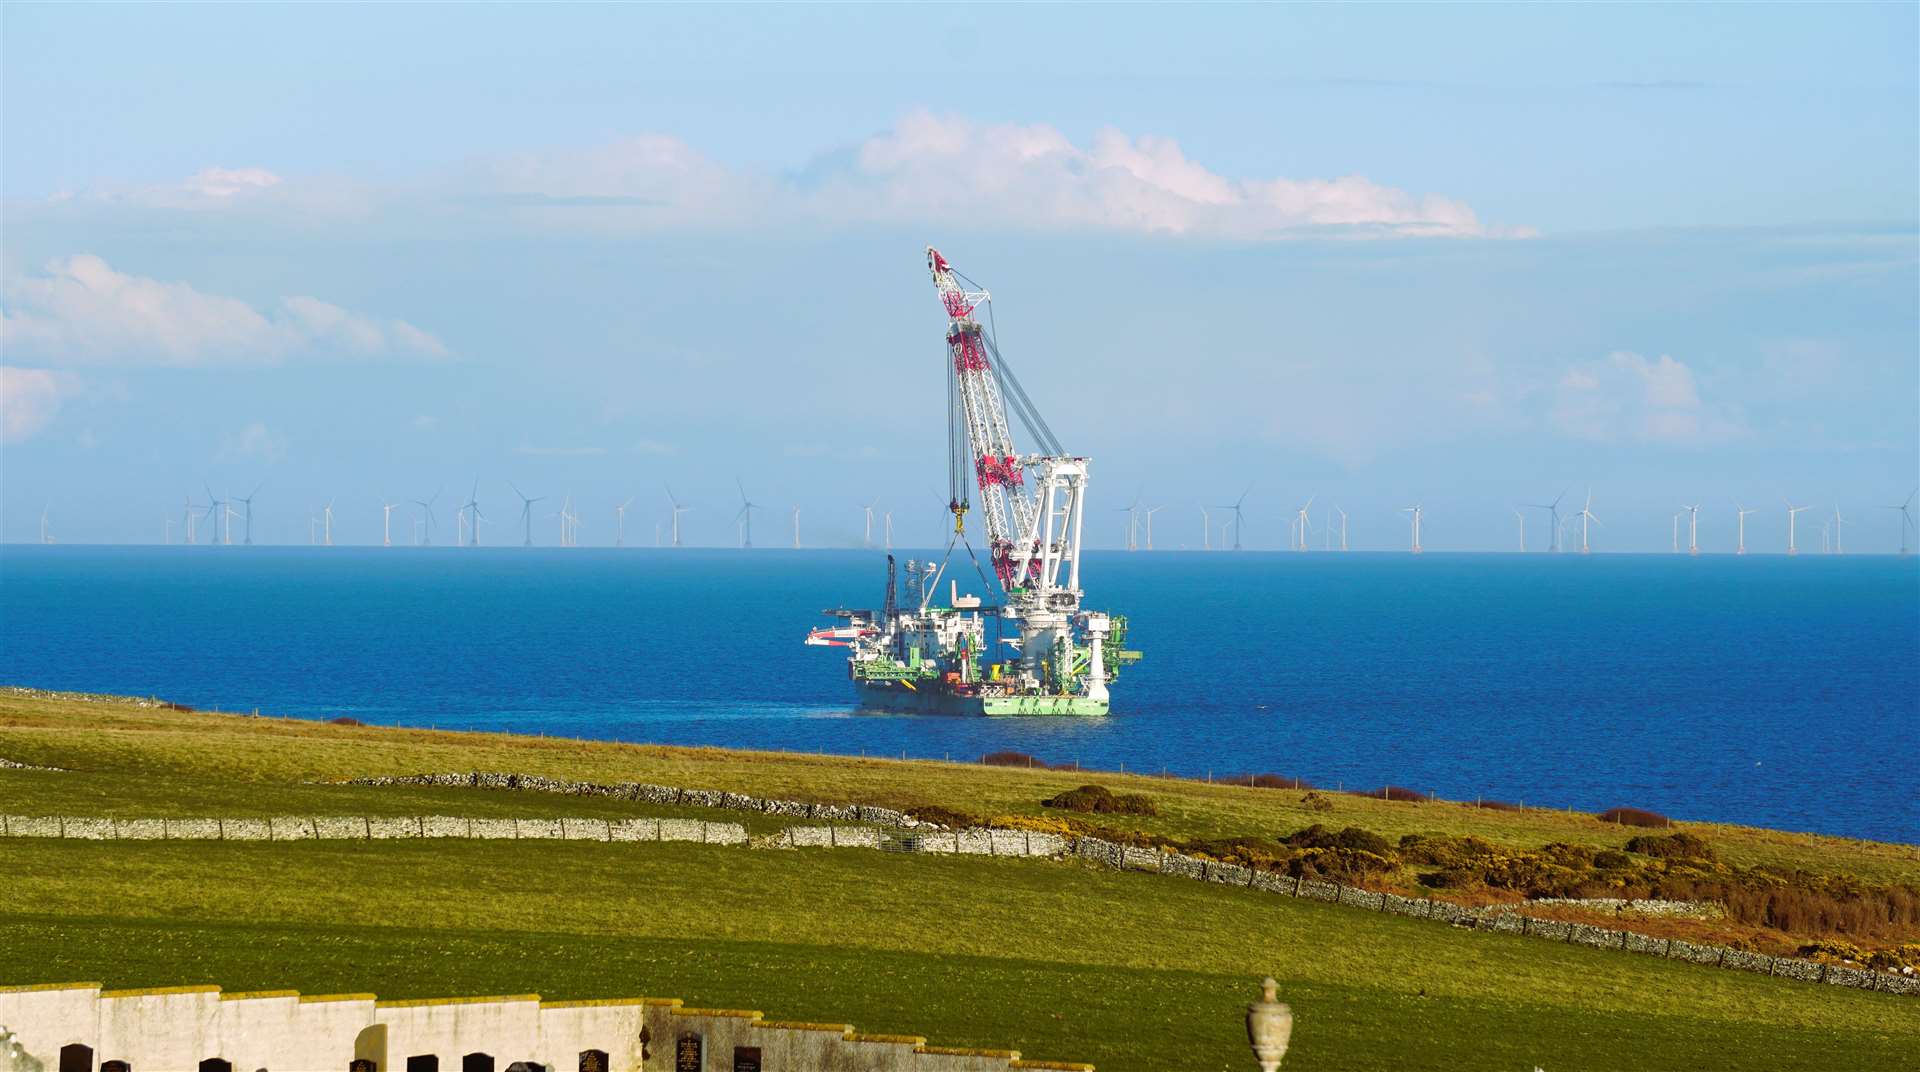 The giant crane Orion was seen off the coast at Latheron on Friday afternoon. The ship is involved in work at the nearby Moray East Offshore Wind Farm. Picture: DGS